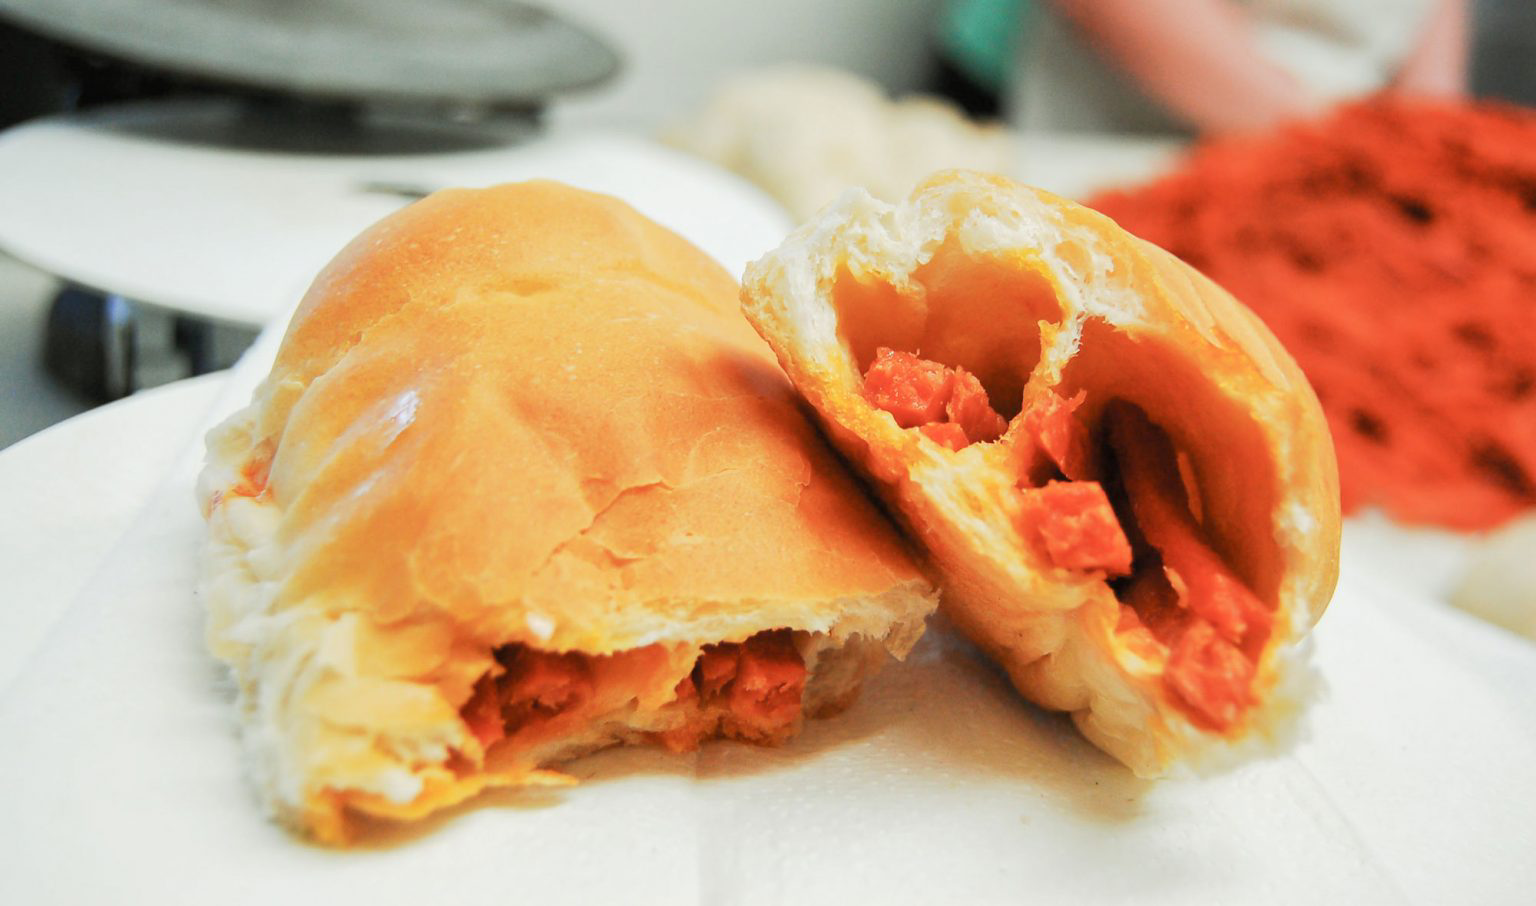 A pepperoni roll ripped in two.